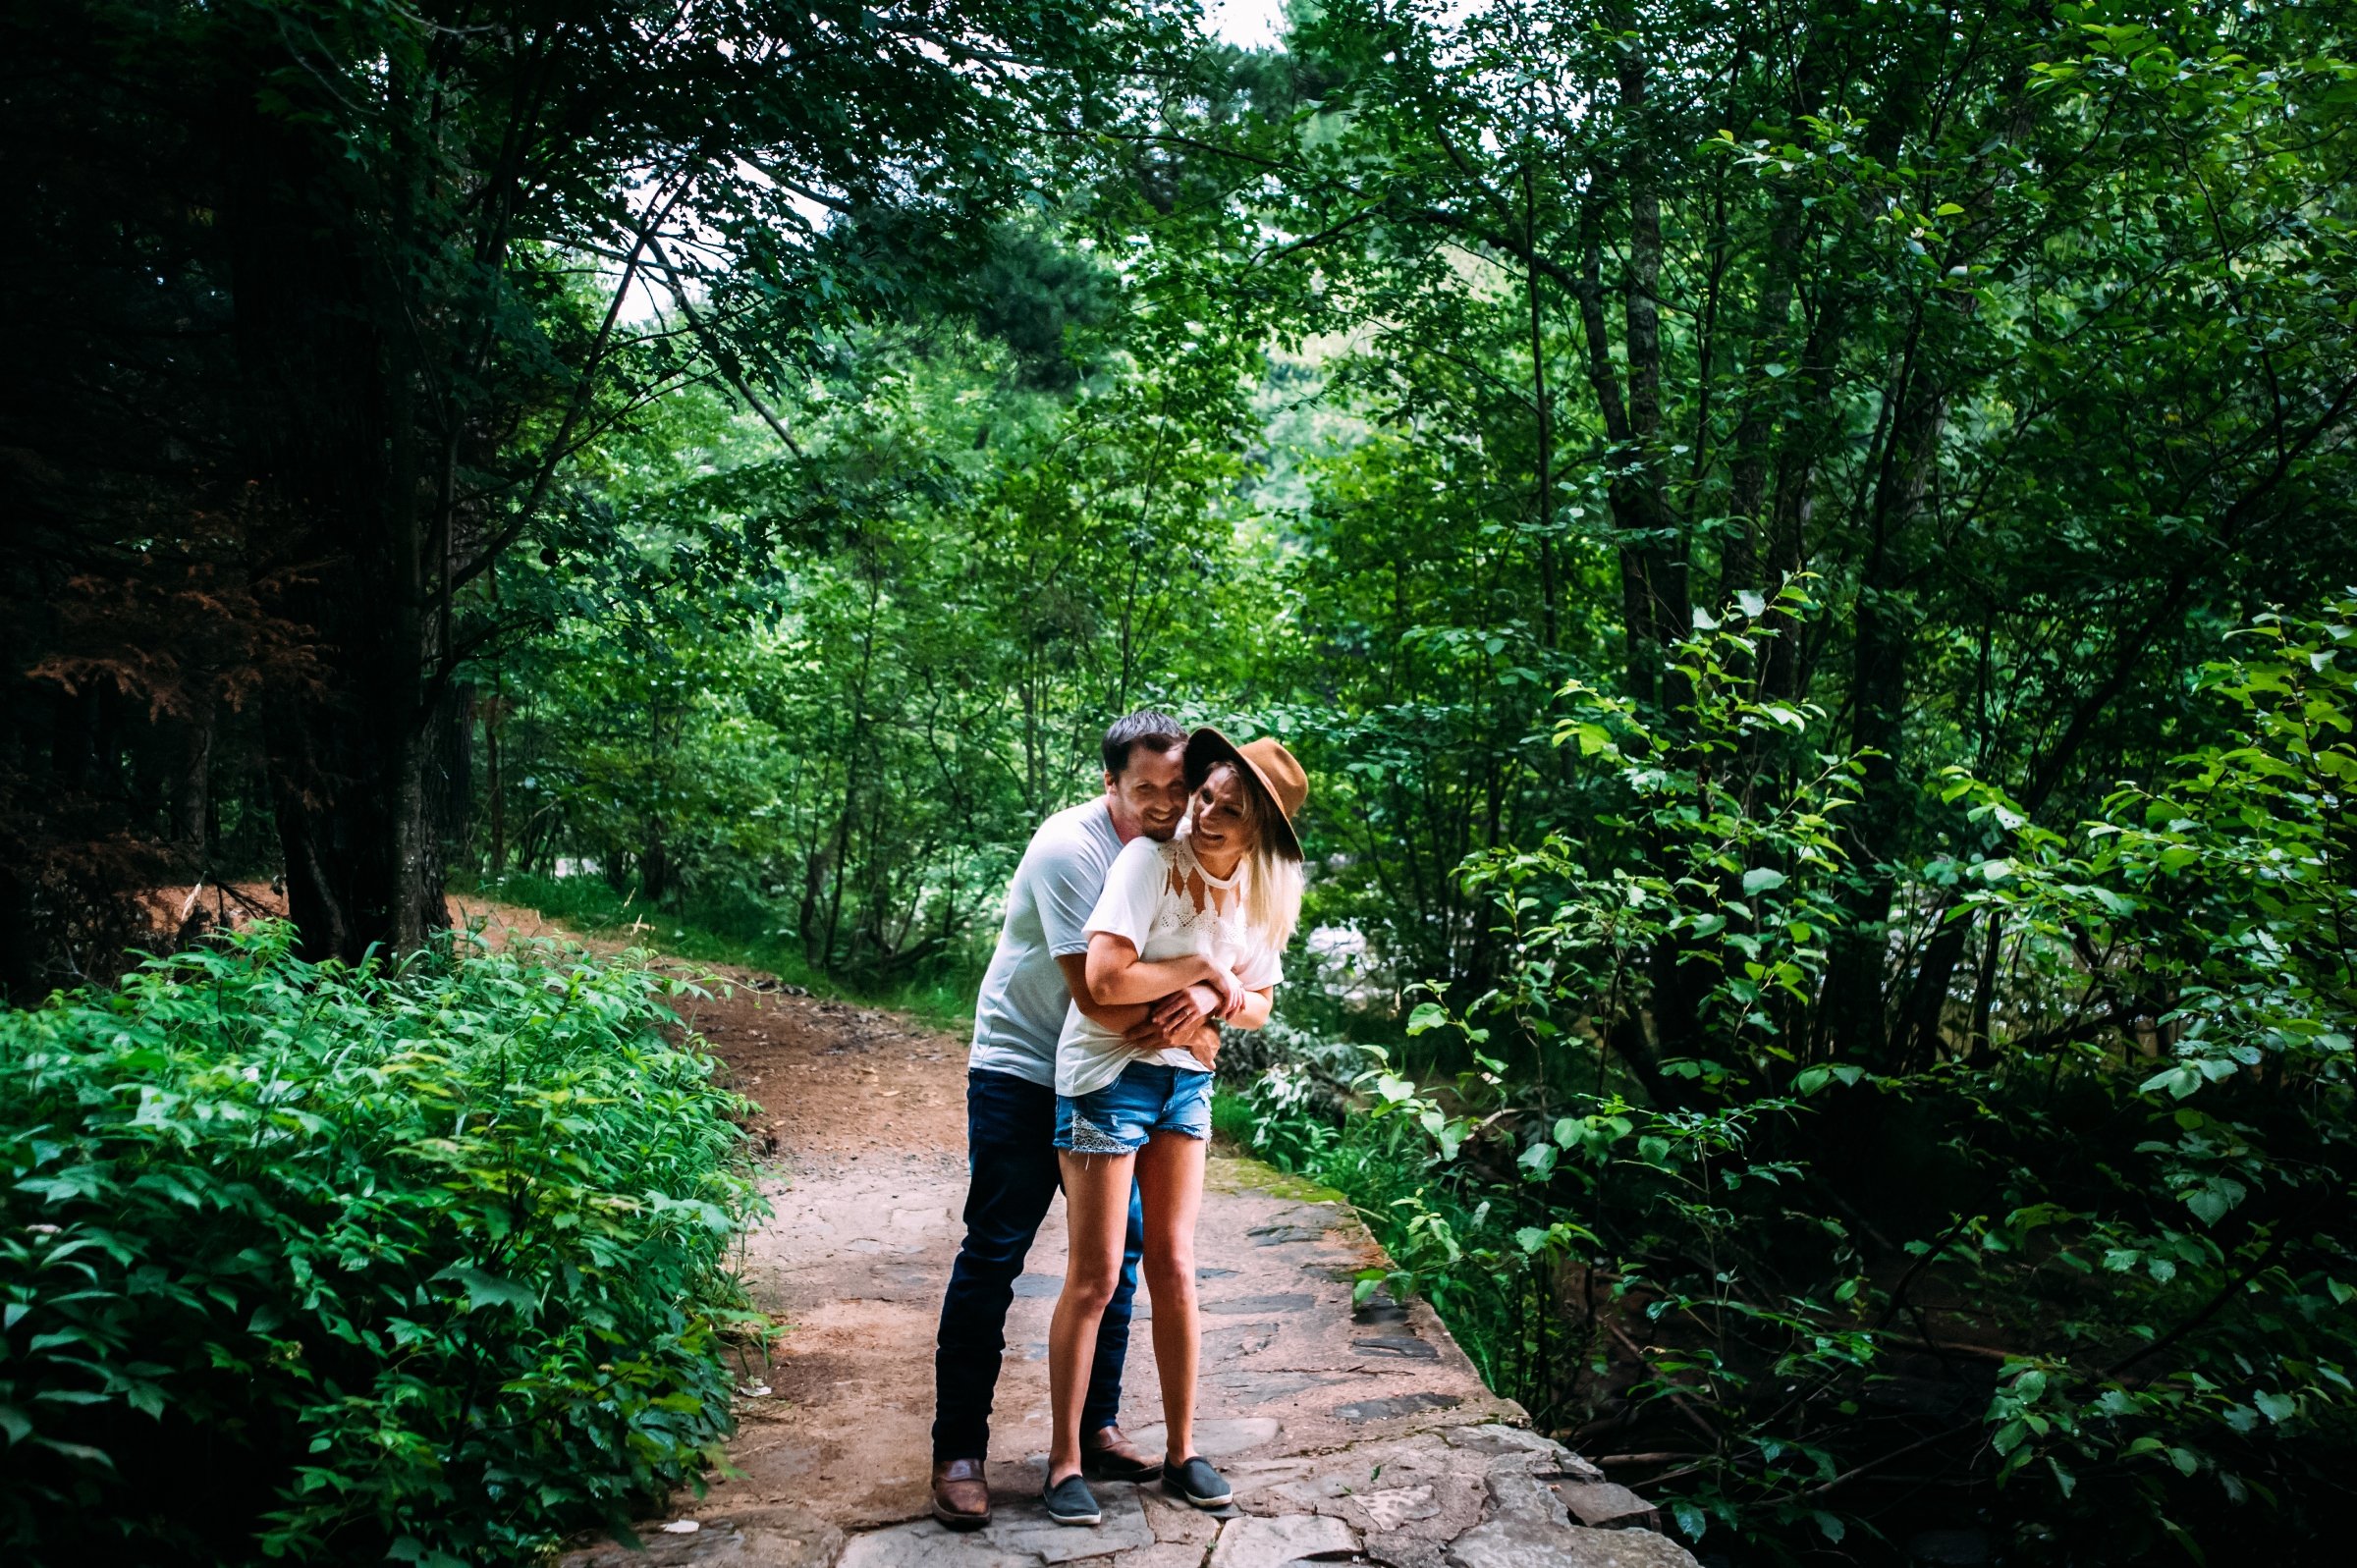 engagement, Wisconsin engagement Photographer, Wausau, Green Bay, Milwaukee, Madison, Minocqua, Door County, What to Wear Photos, unique engagement photos